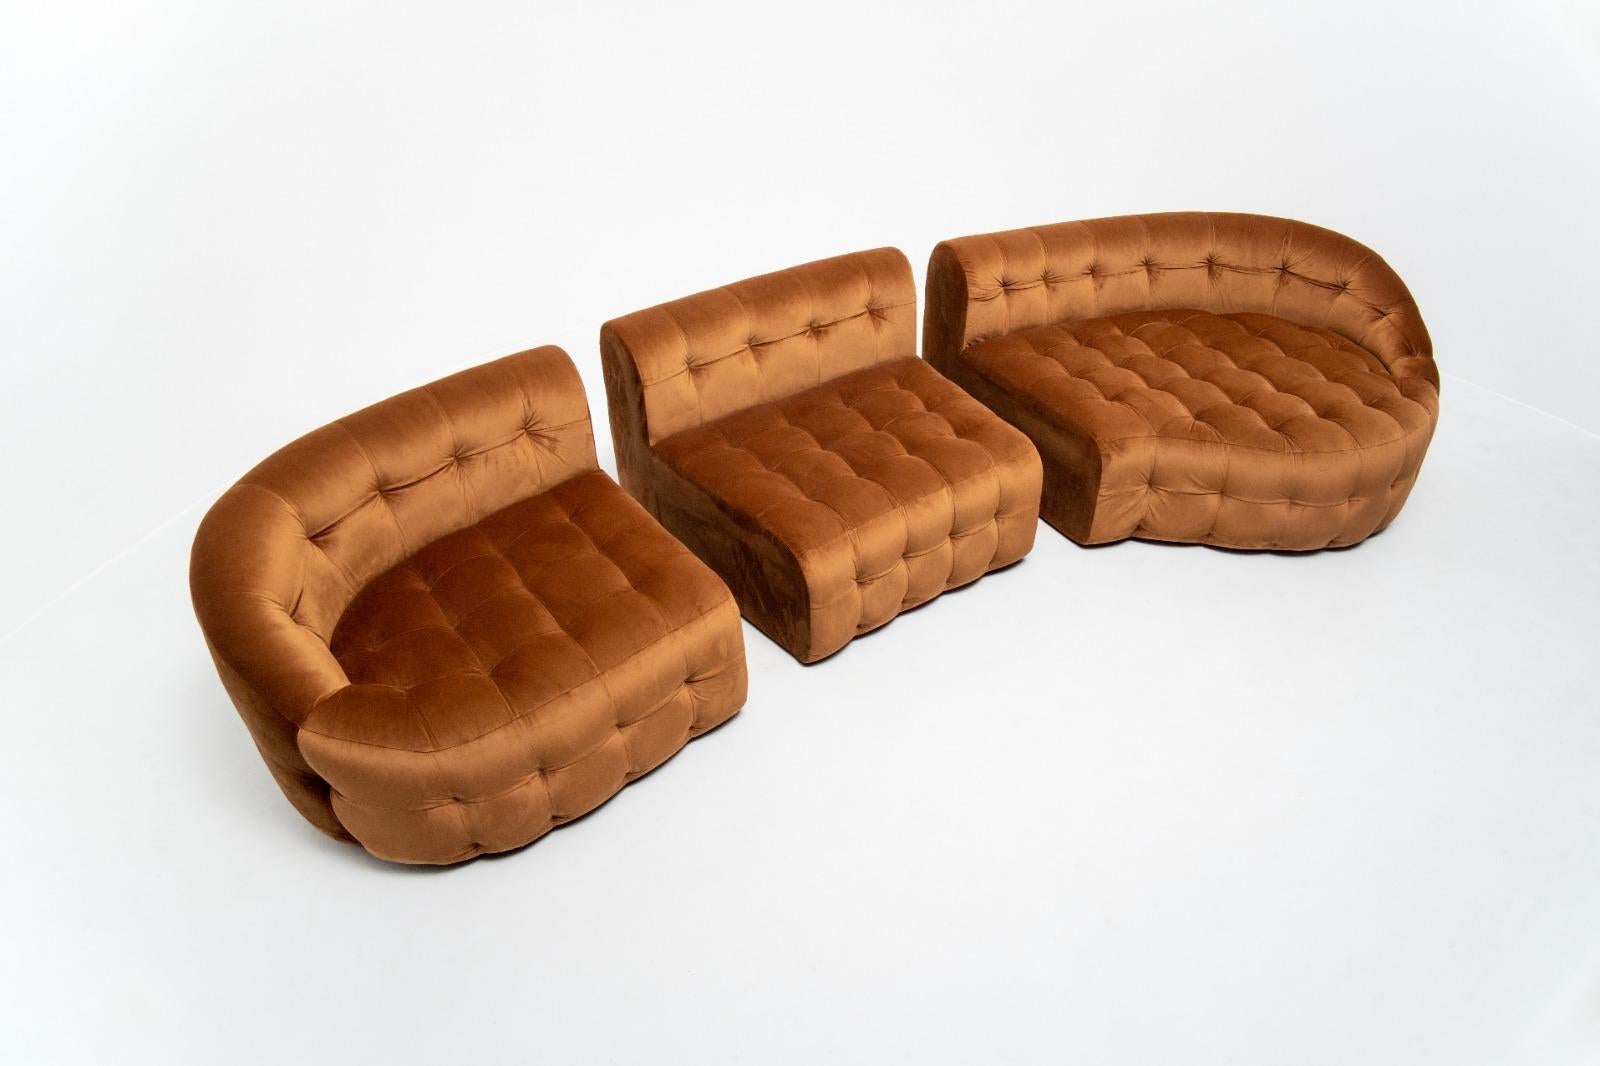 Serenity sofa tan, a tufted modular sofa with modules 1A, 4 and 2B adds glamour to interior spaces. It has a unique versatility of shape and size enhanced by rich velvet. Each module can be sold separately and combined with others to create a unique